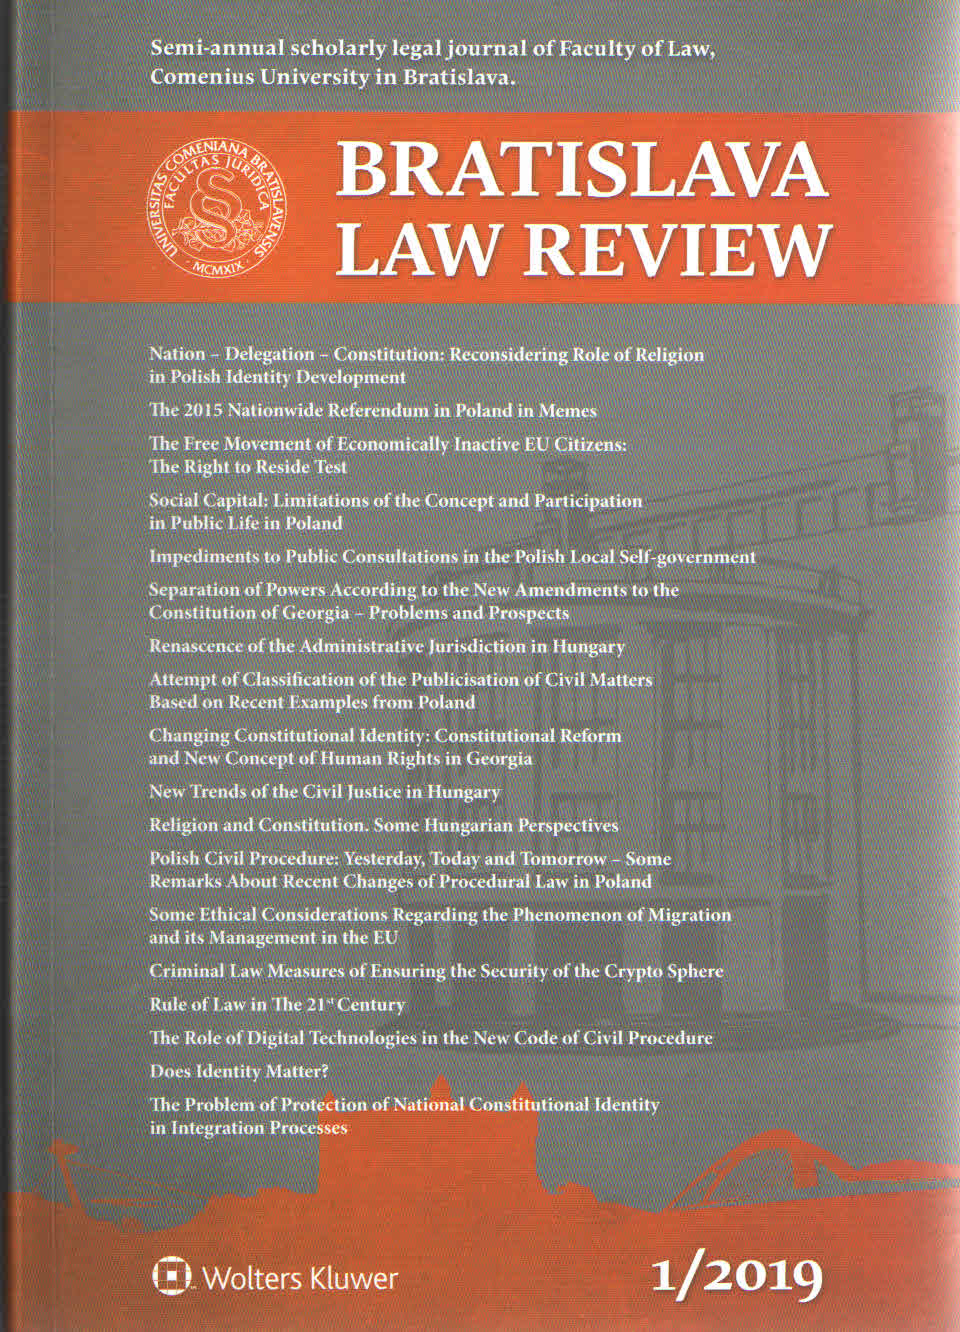 POLISH CIVIL PROCEDURE: YESTERDAY, TODAY AND TOMORROW – SOME REMARKS ABOUT RECENT CHANGES OF PROCEDURAL LAW IN POLAND Cover Image